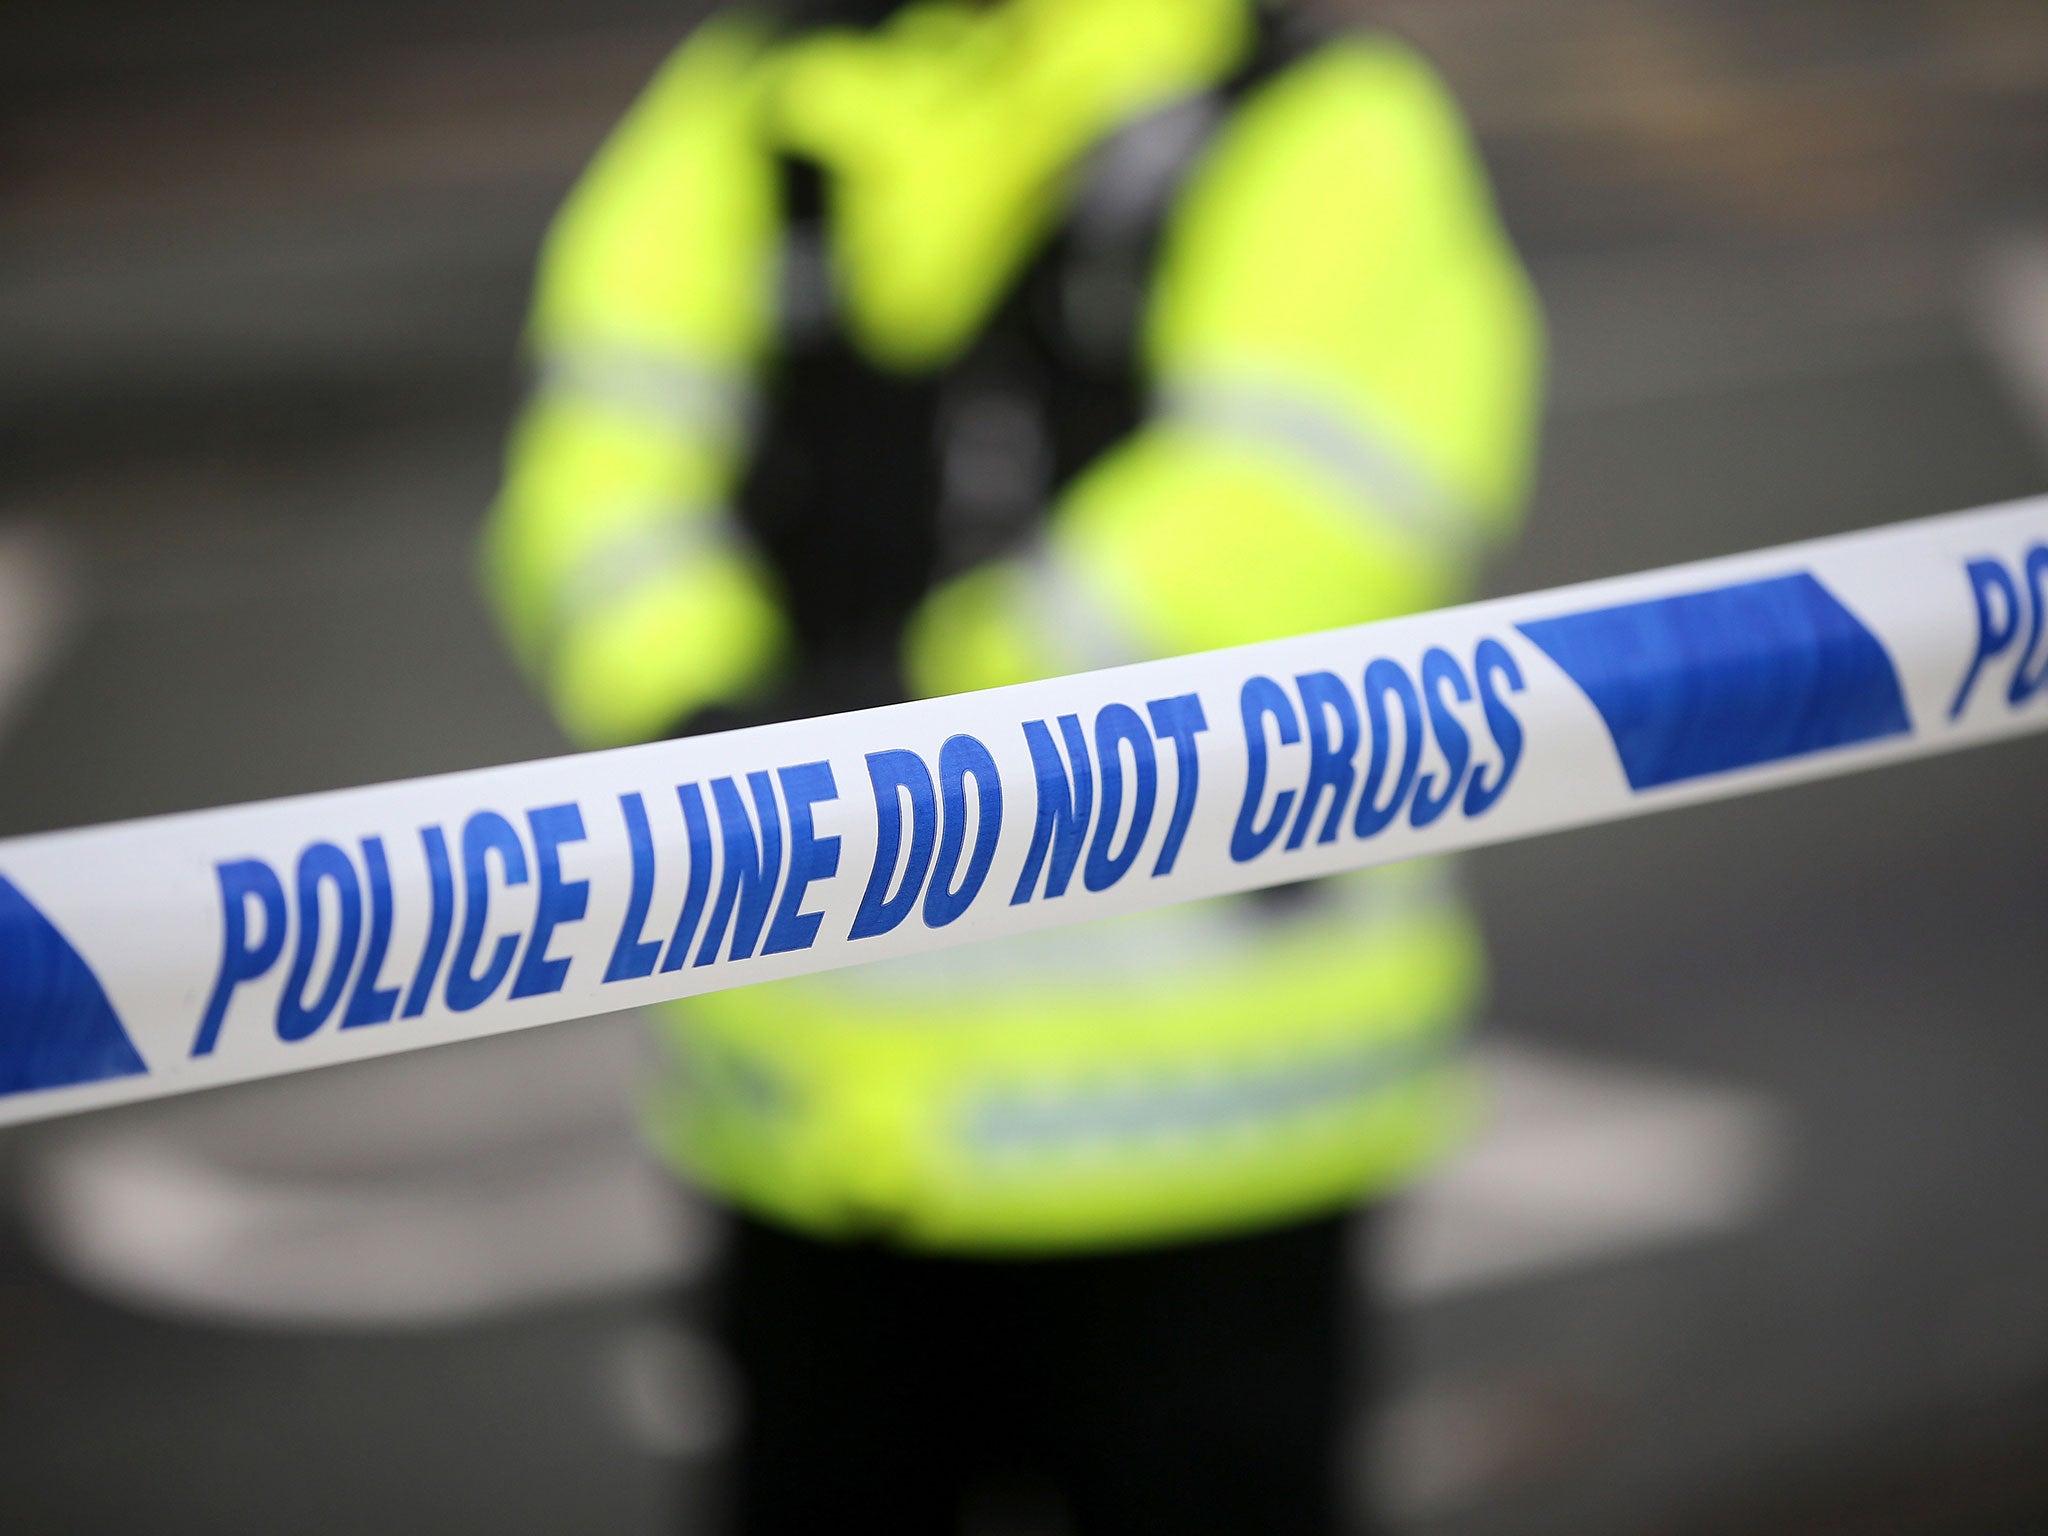 Dyfed-Powys Police are investigating the incident, which took place near Llanybydder